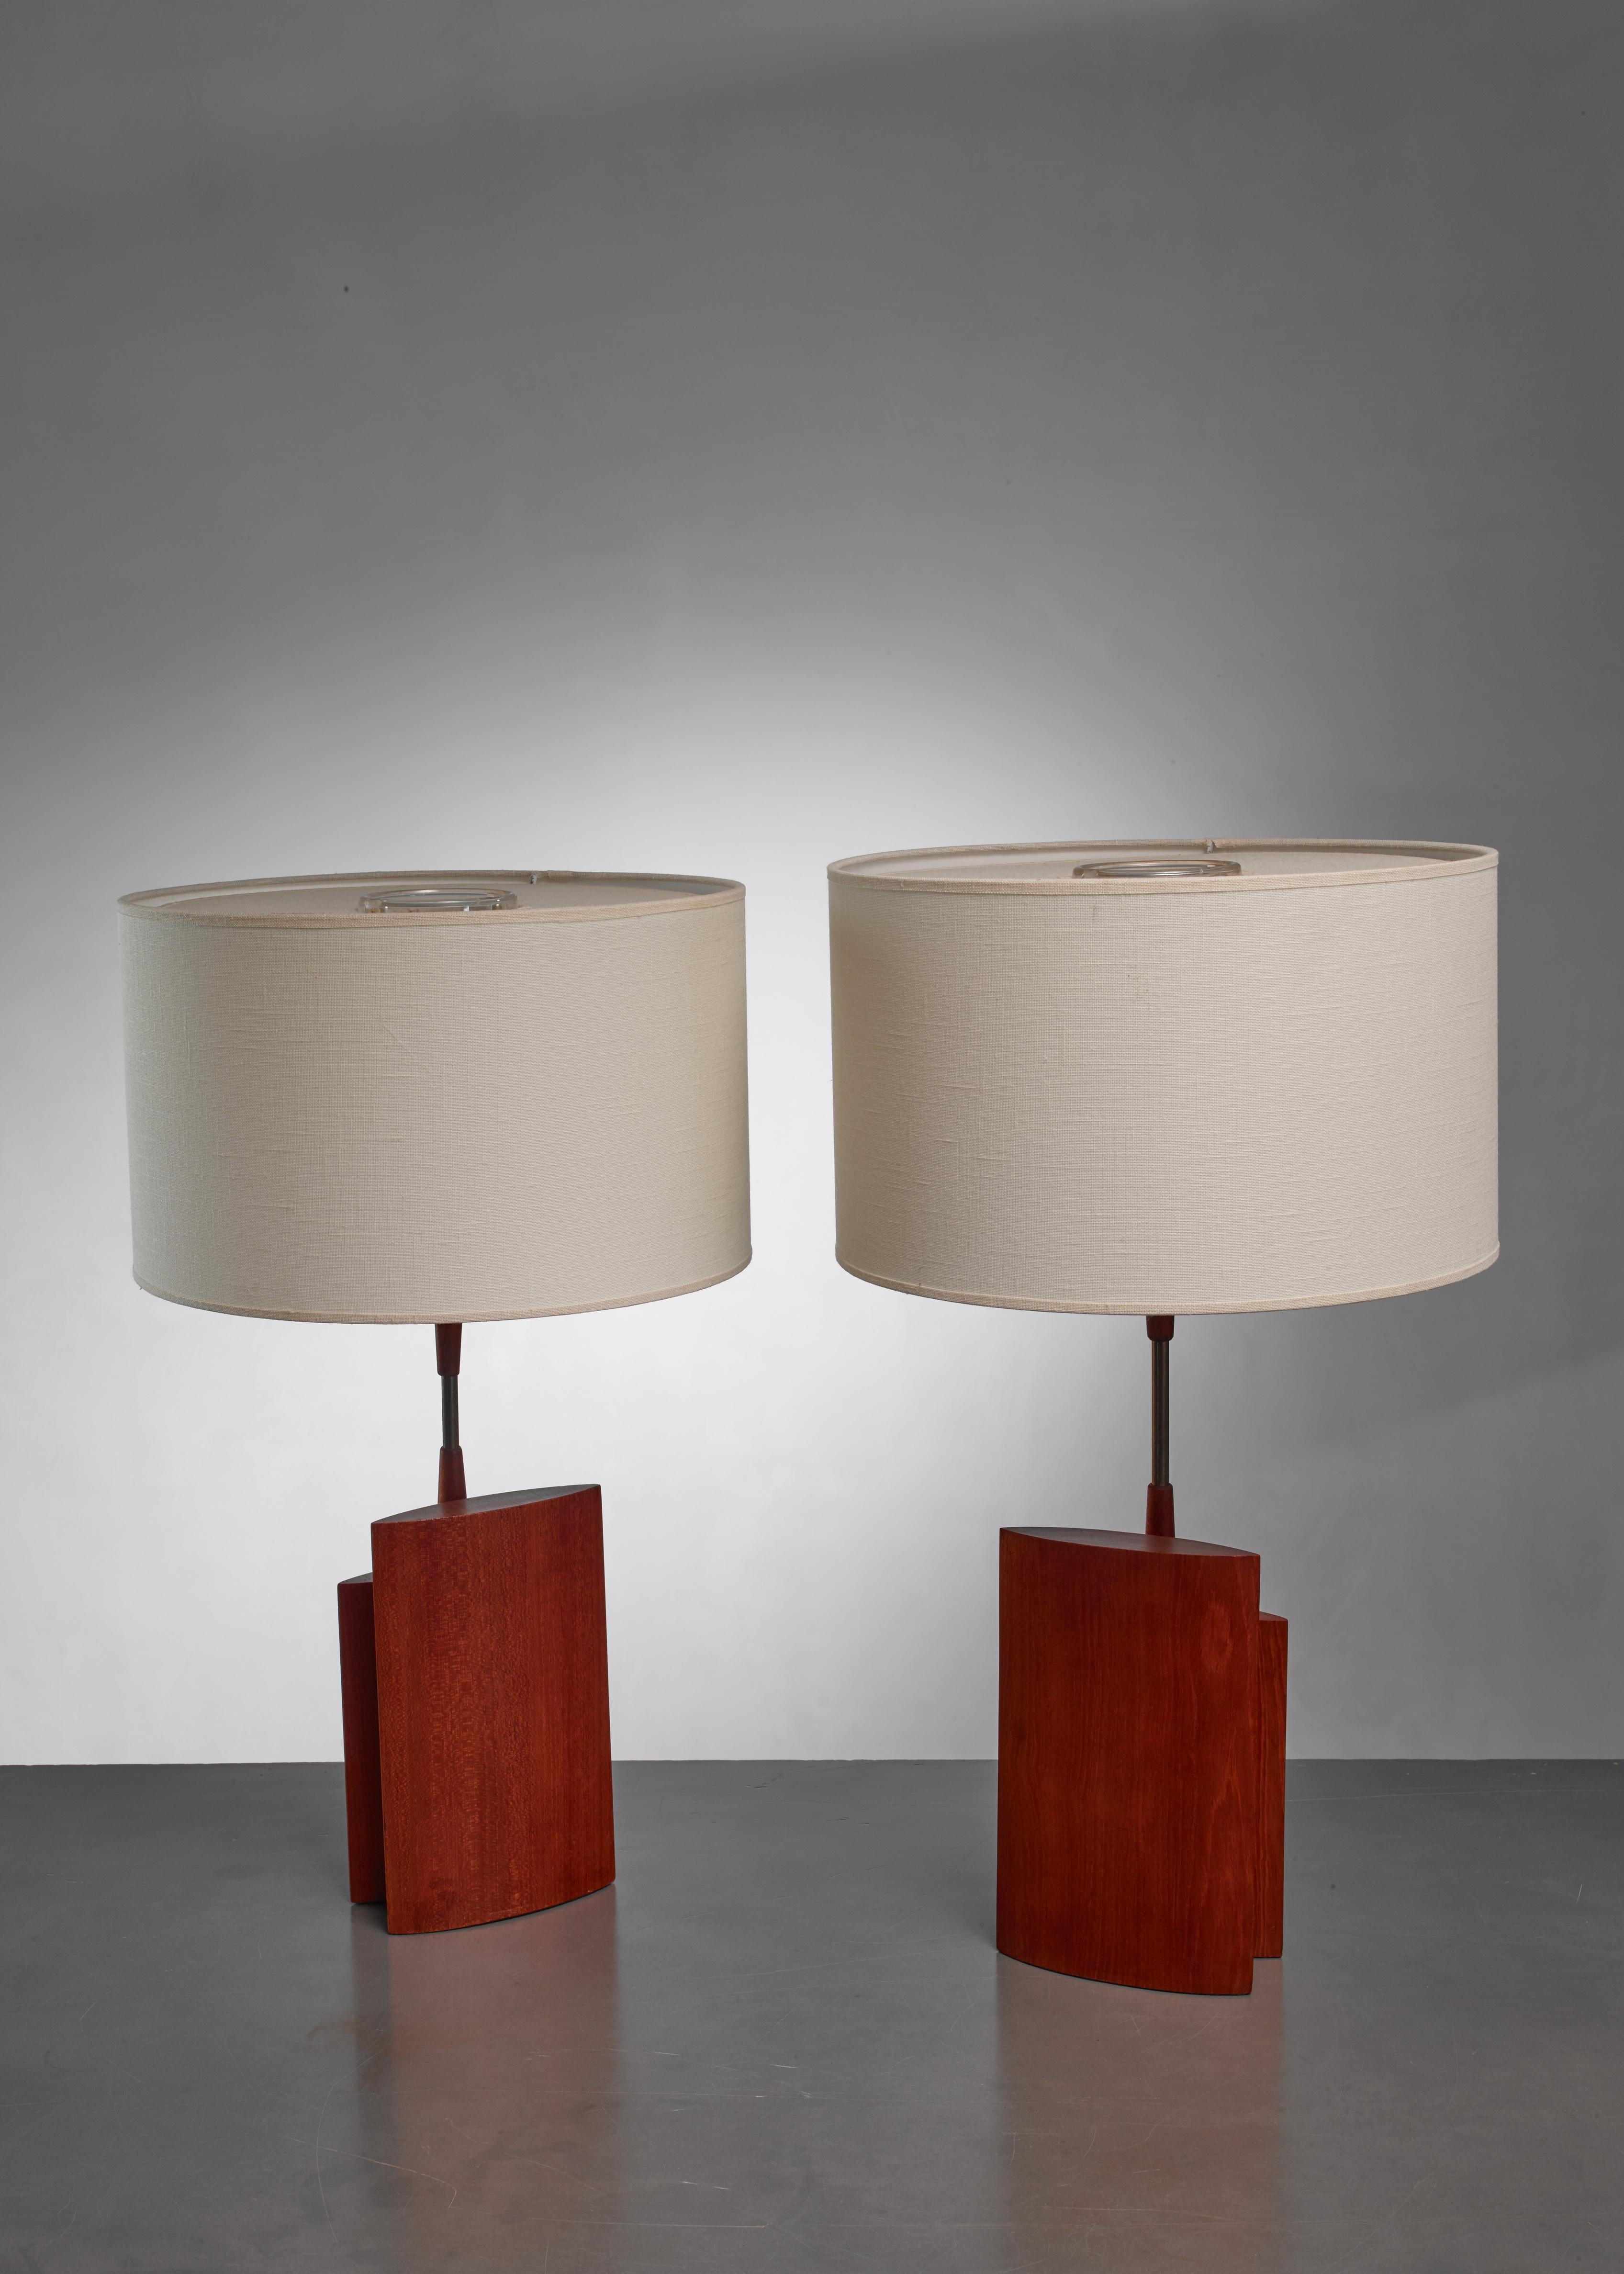 A pair of Danish table lamps made of two ellipsoid parts of wood with a brass stem. The lamp features two asymmetric ellipsoid wood pieces with the brass stem in the centre. The measurements are of the base of the lamps without a shade and measured